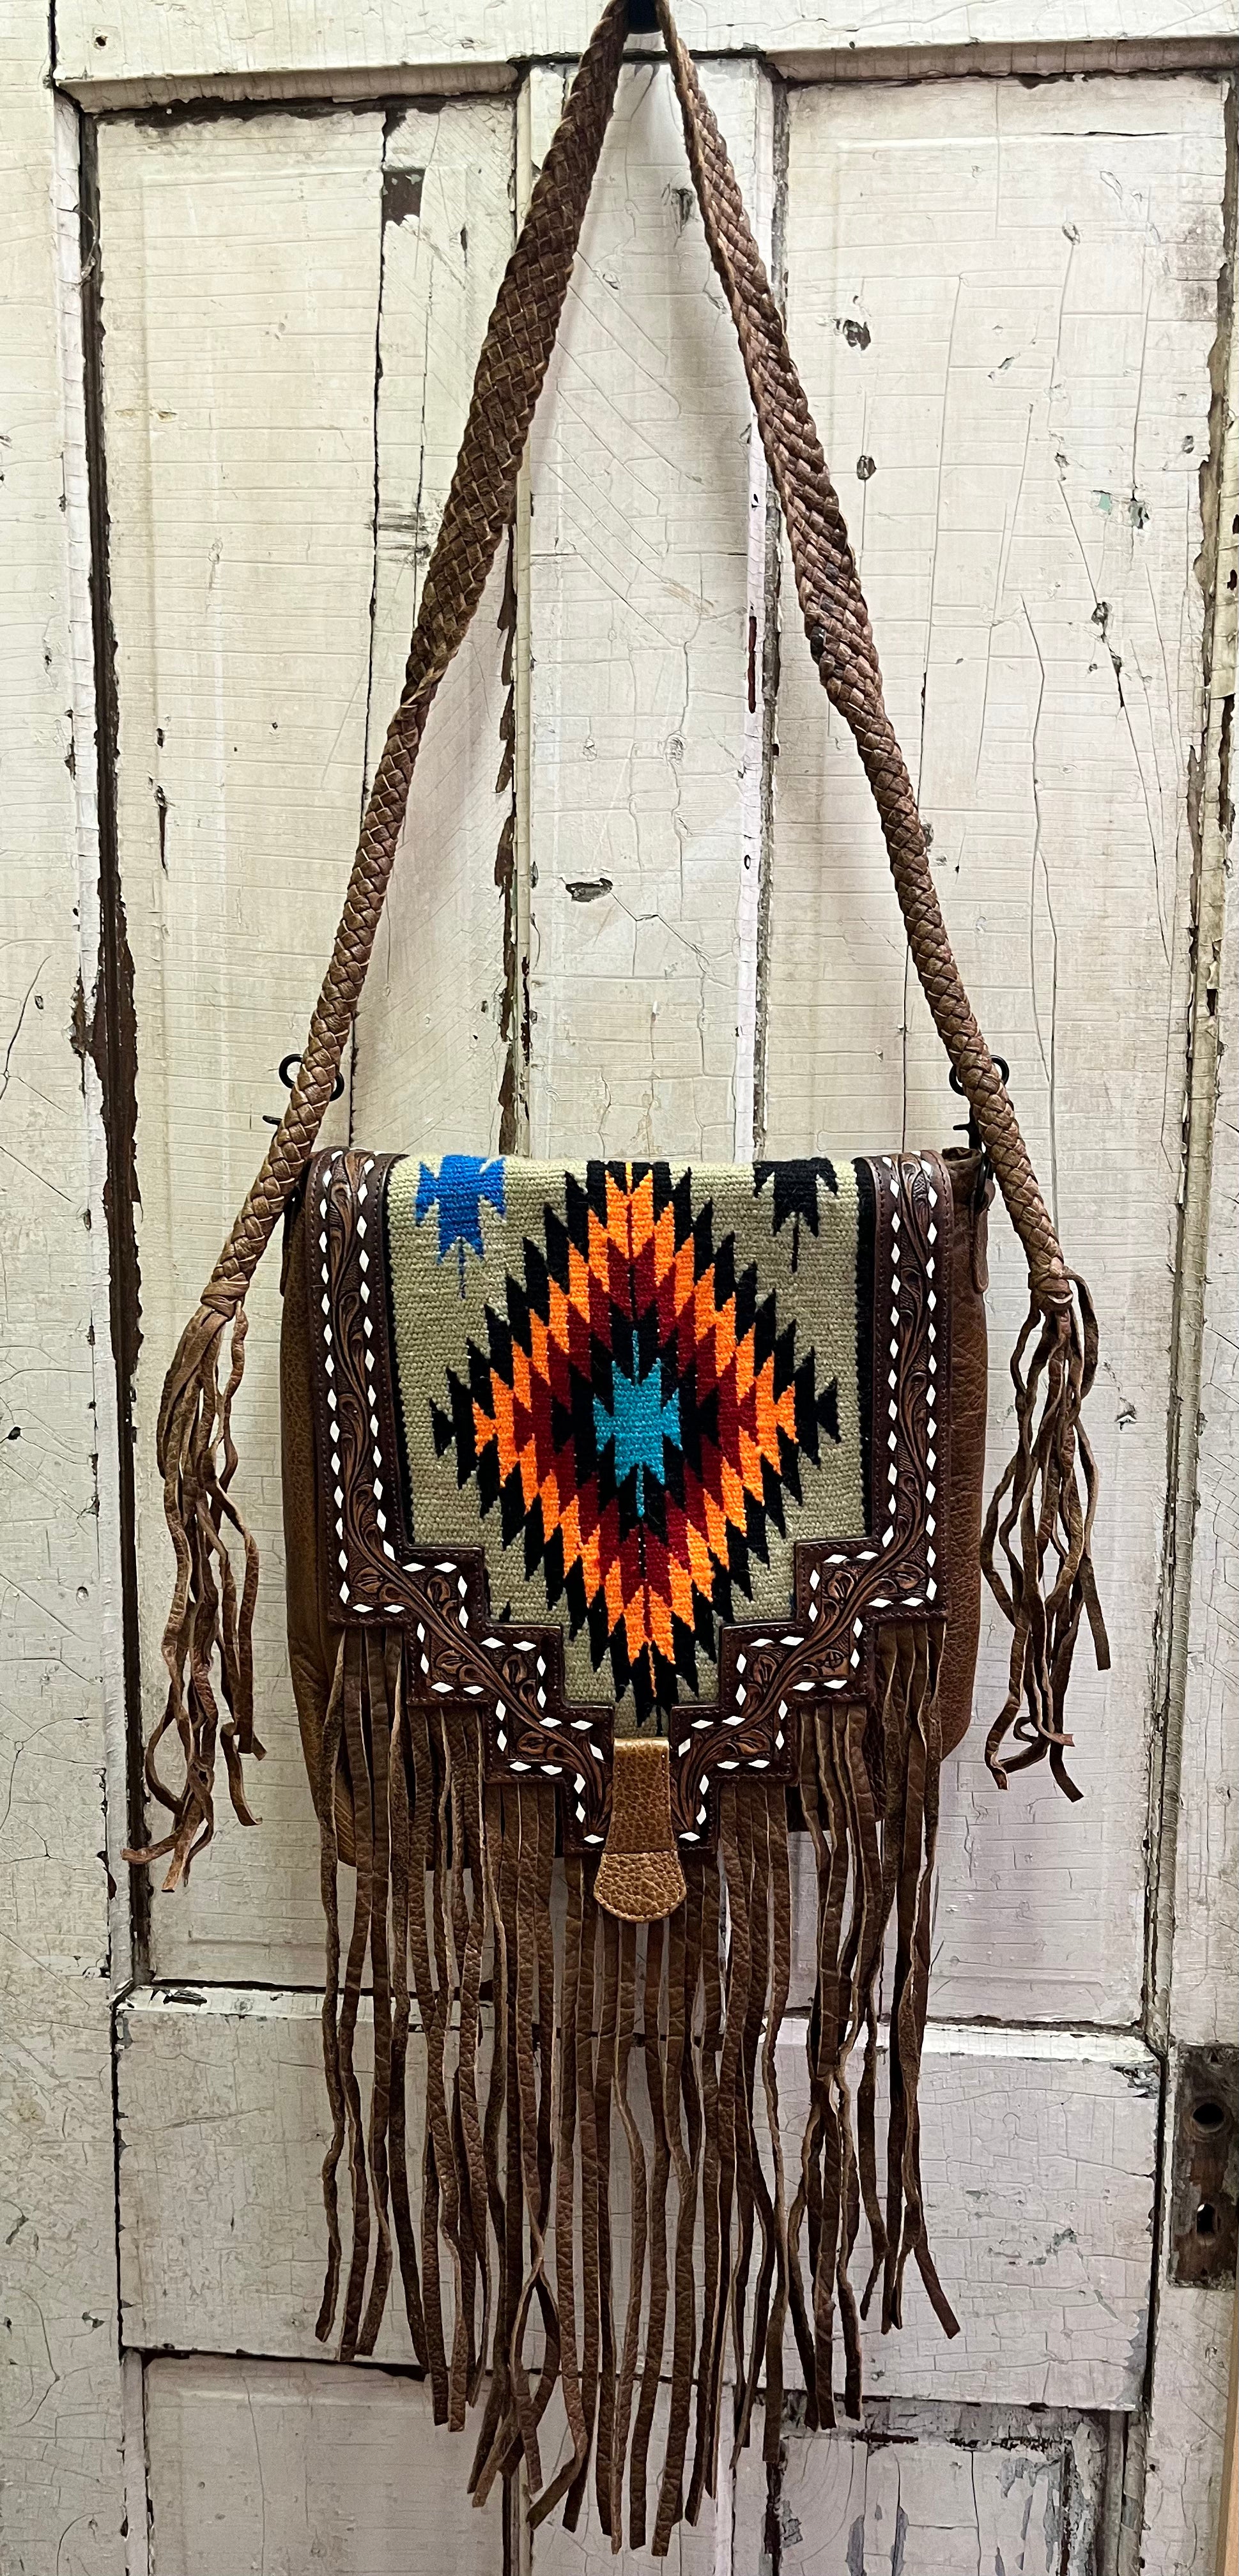  American Darling Cross Body Vintage Bag Large Leather Fringe  Crossbody Purse Western Handbags Quilted Saddle Blanket Cowhide Stylish  Handmade Shoulder Handbag Hand Carved Strap (adbgz306a) : Clothing, Shoes &  Jewelry